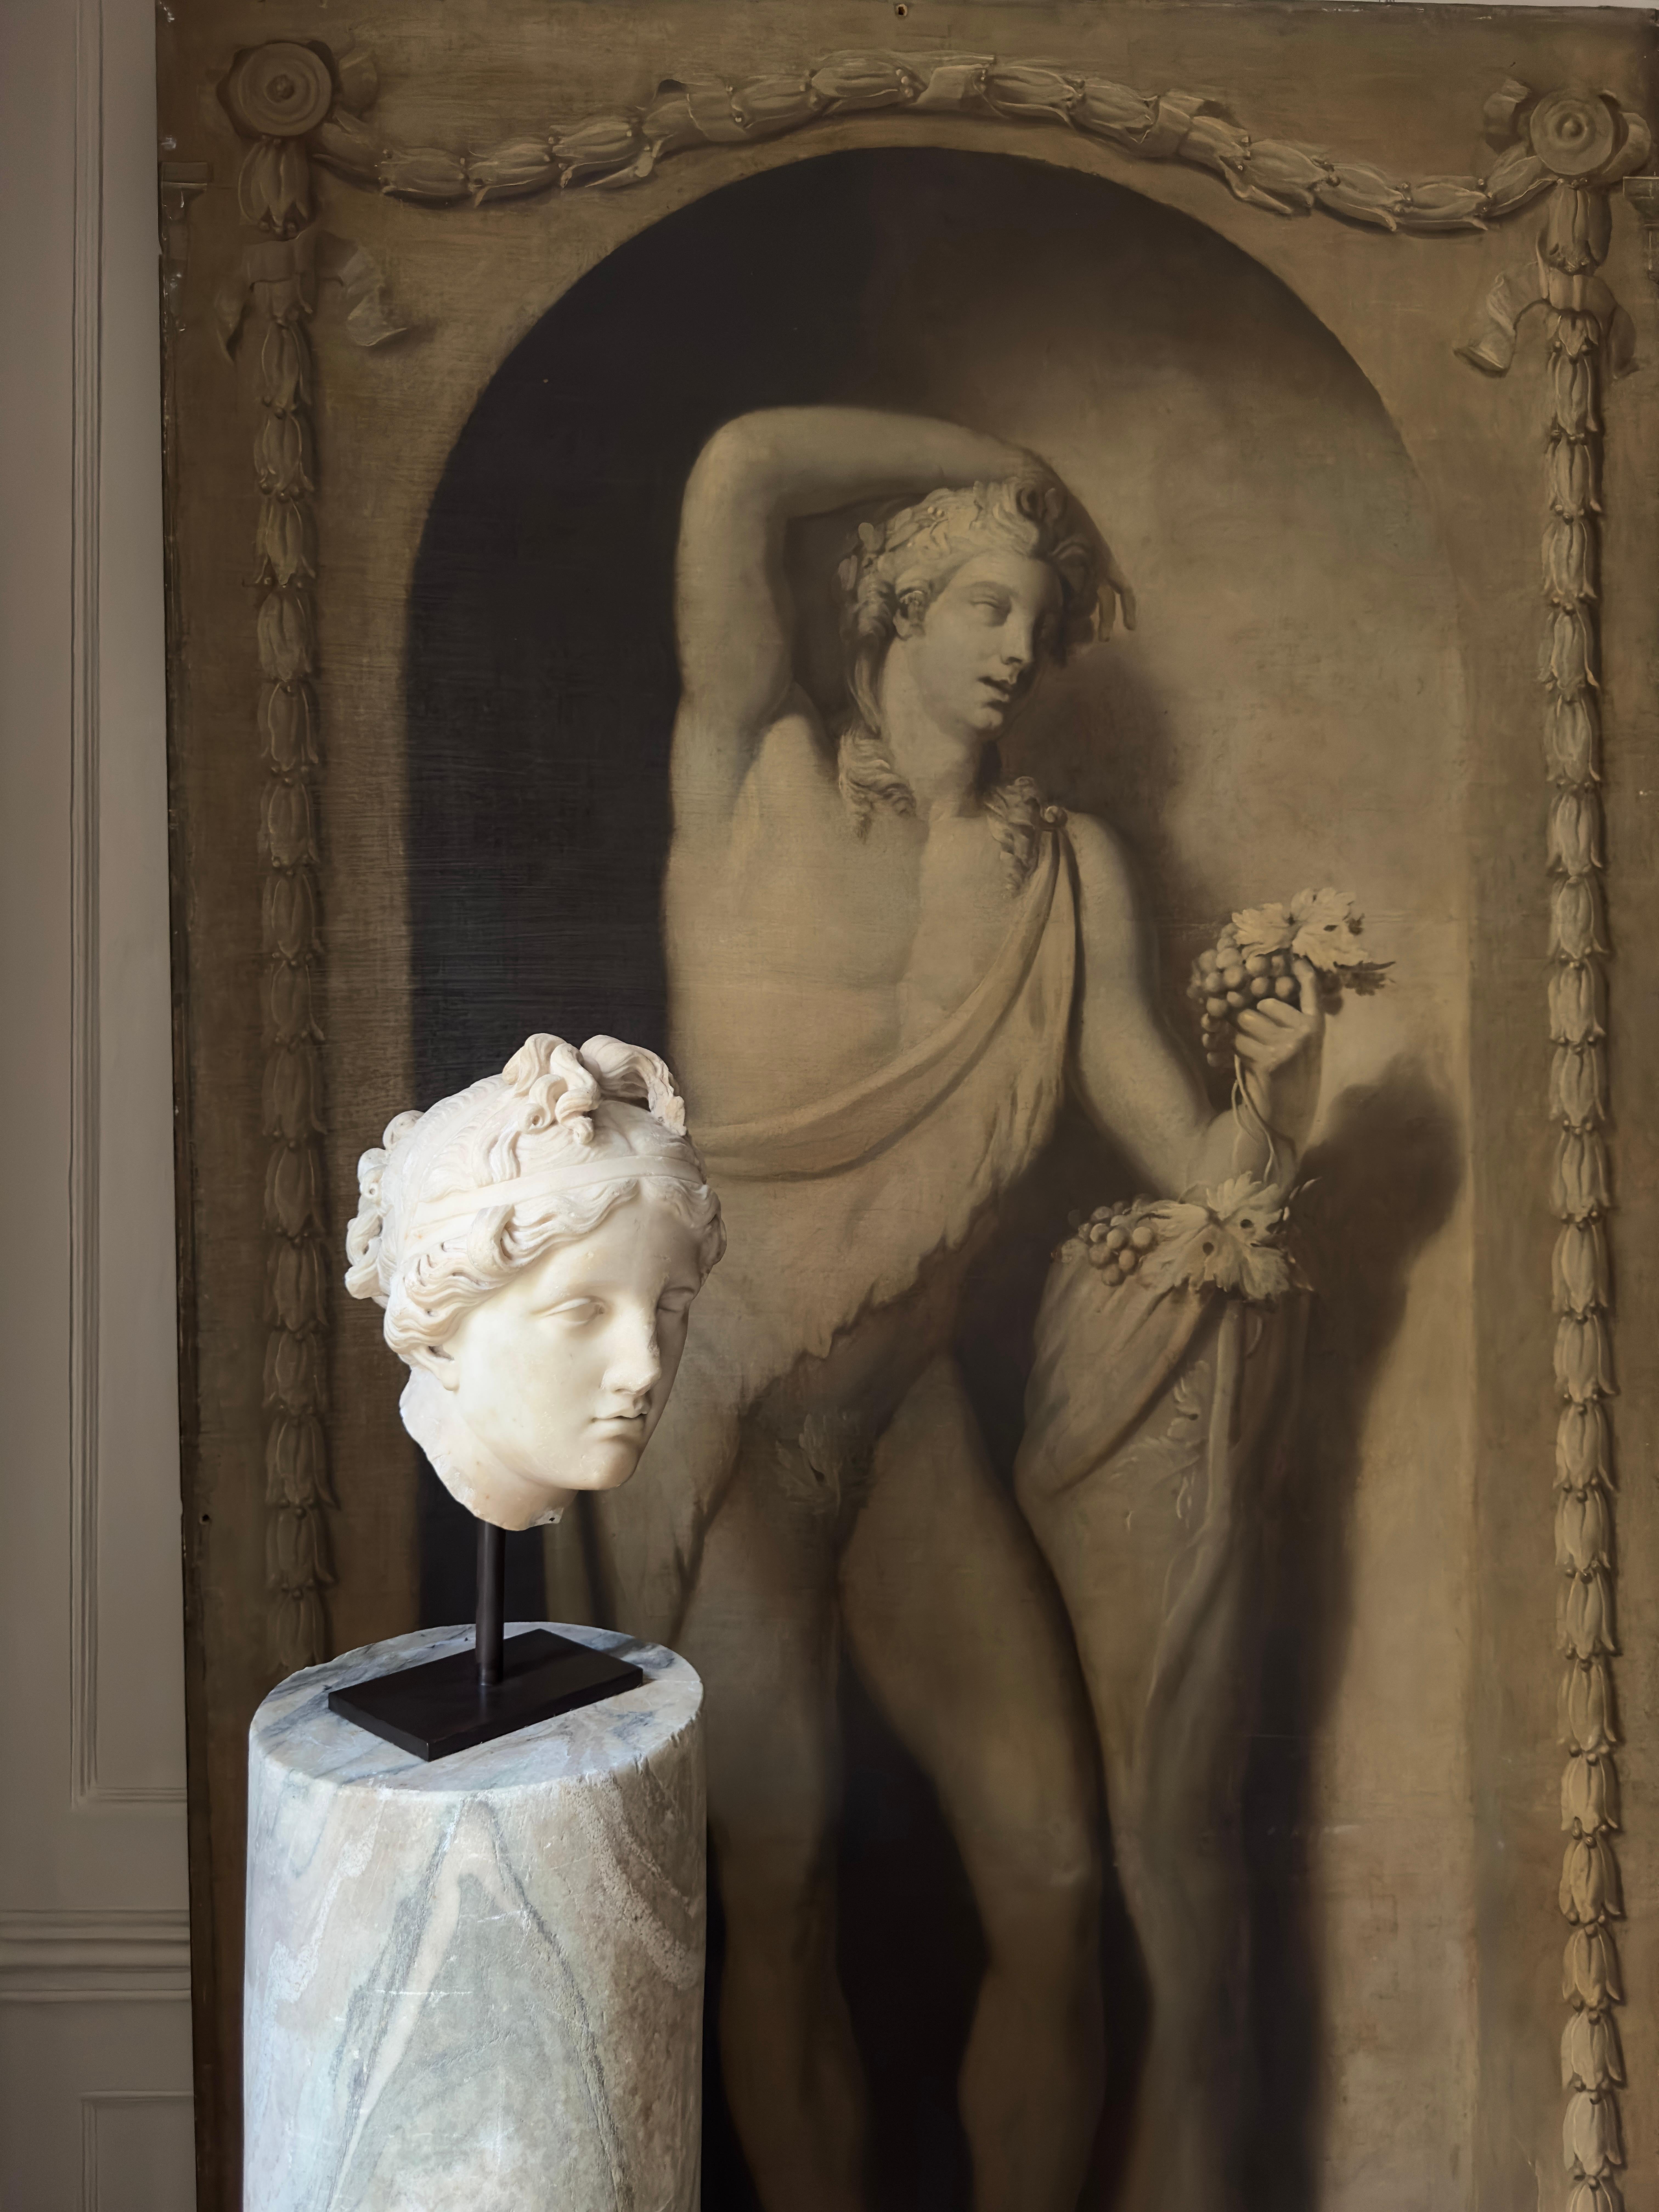 A large 18th century or earlier statuary marble head of Venus, goddess of Love. Life-size and beautifully carved with superb detail to her hair & face. Probably Italian and an early representation of the ‘Crouching Venus’.

Measures - 39cm H x 18cm